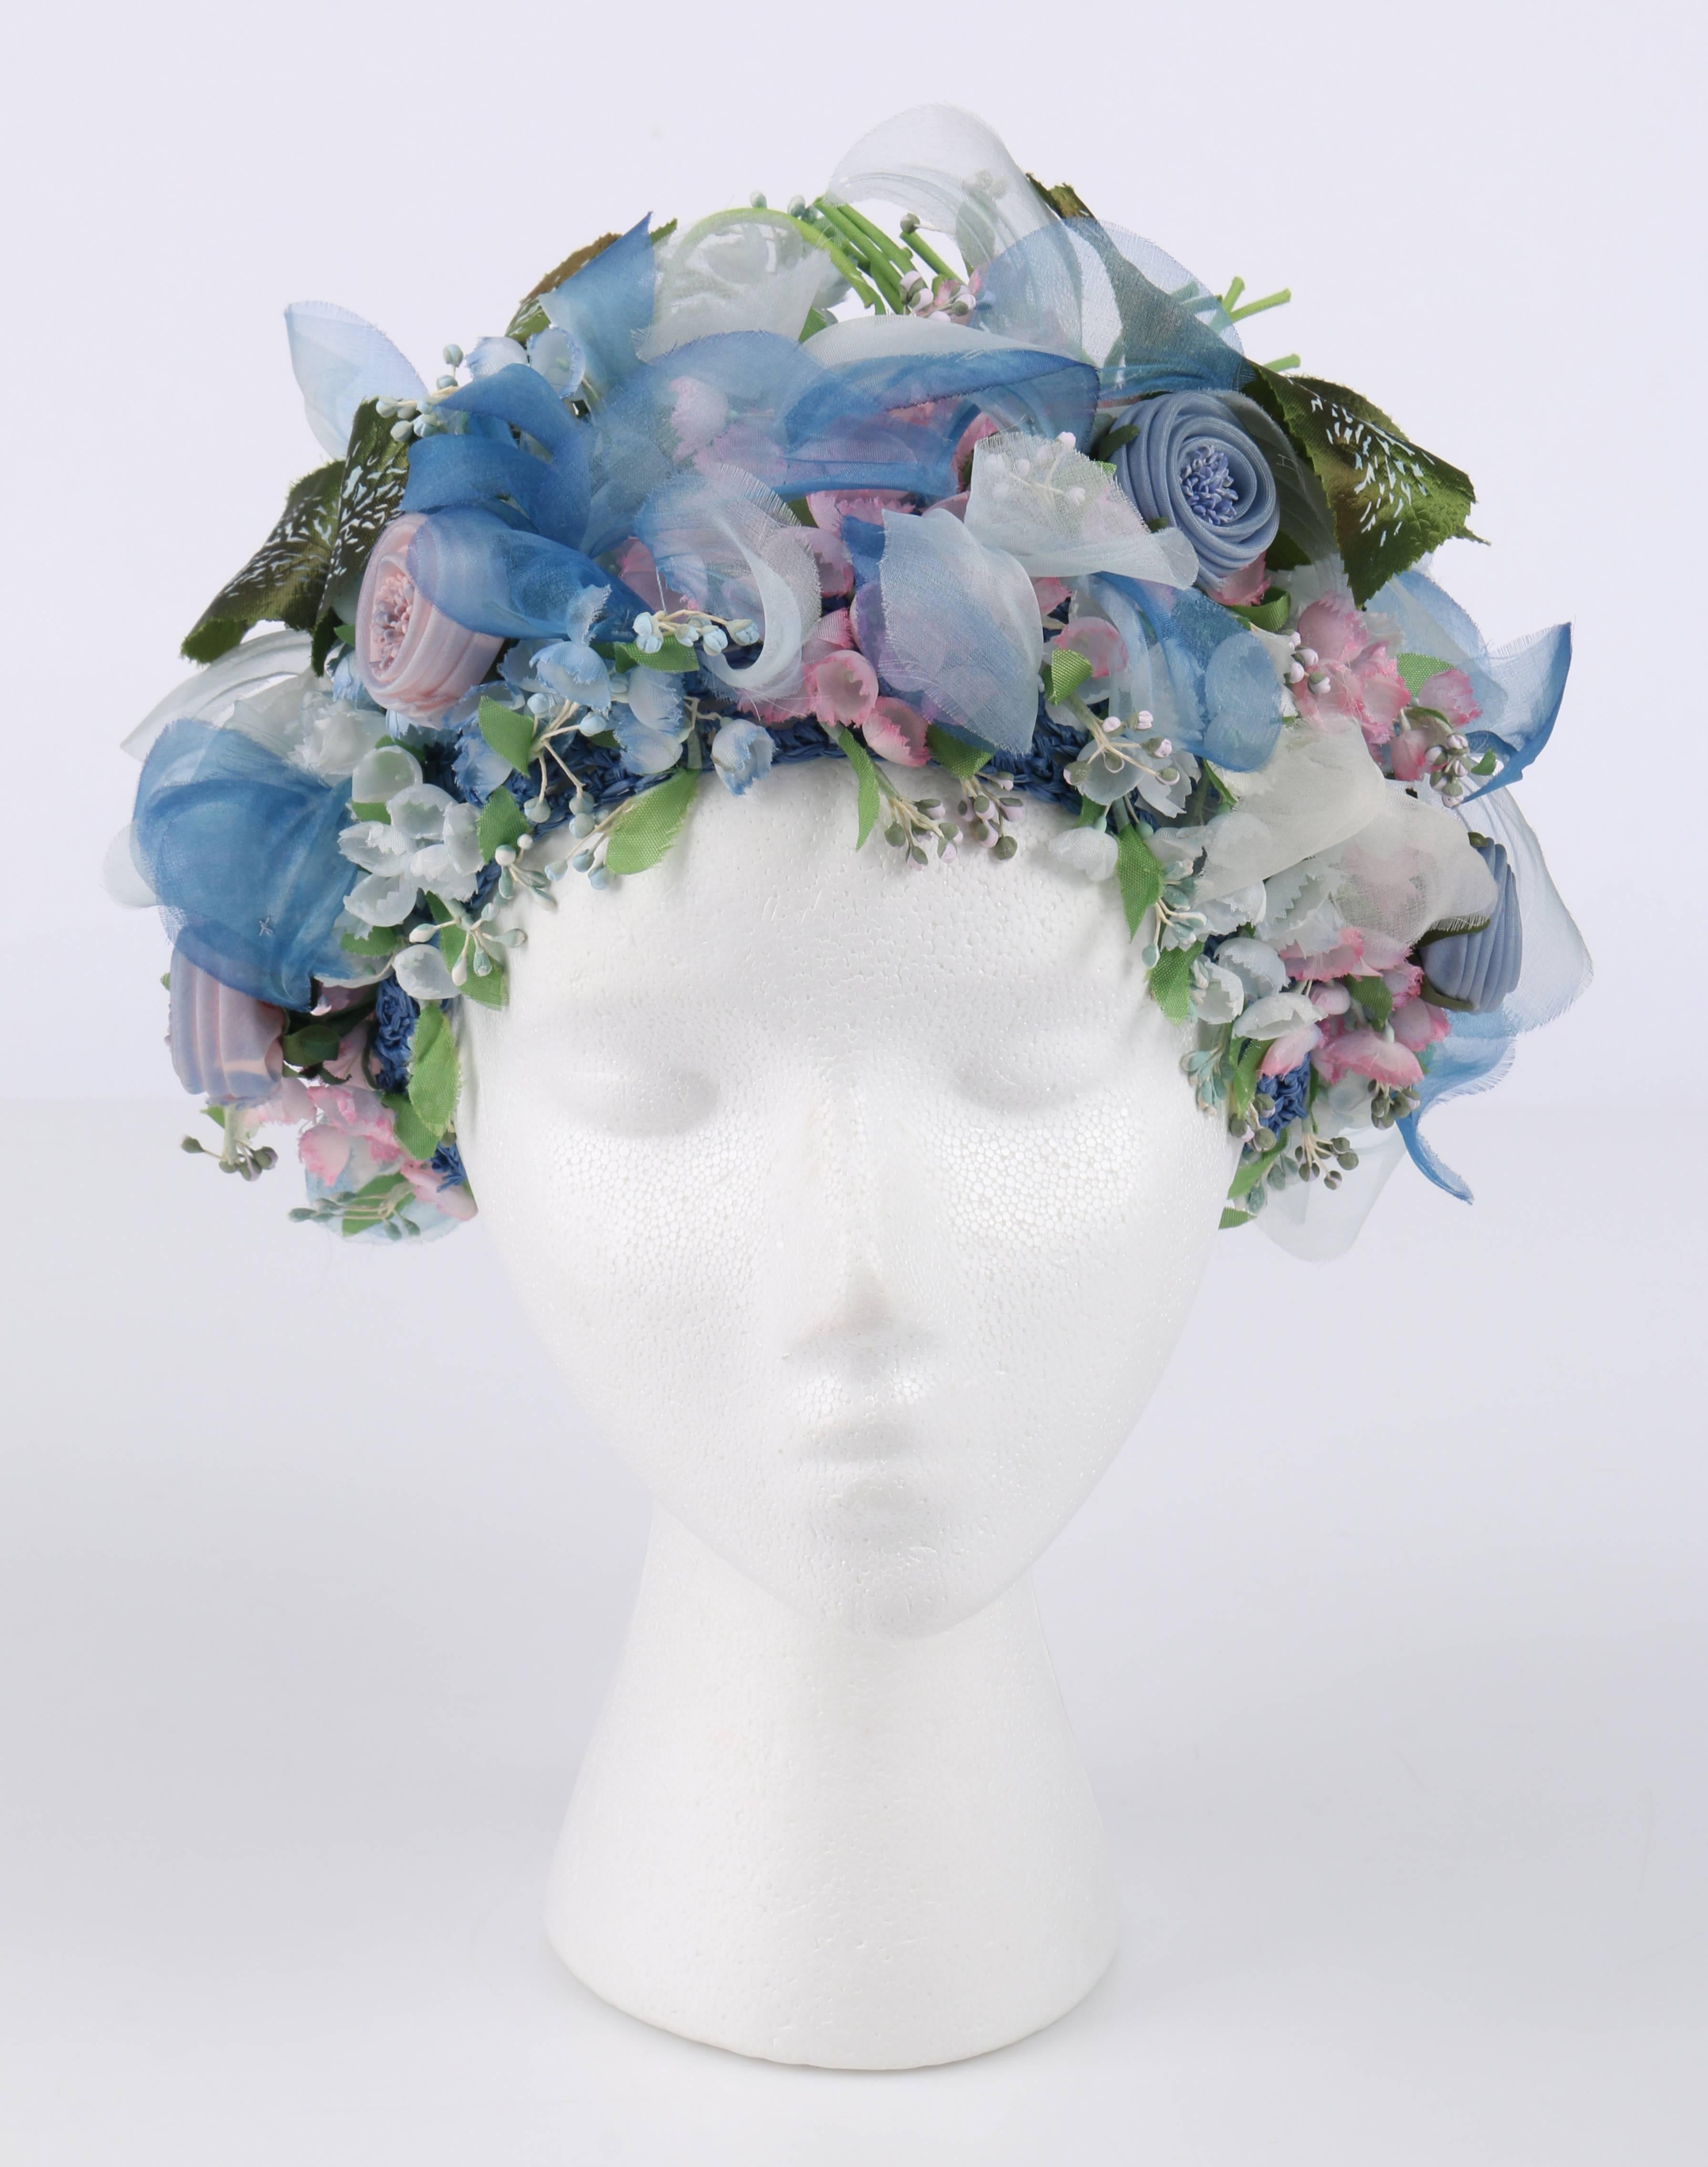 Vintage Miss Dior created by Christian Dior c.1960's silk floral capulet style hat. Blue, white, pink, and green silk flowers and leaves. Blue straw crochet mesh base with silk crochet top. Unlined. Unmarked Fabric Content: Silk and straw.